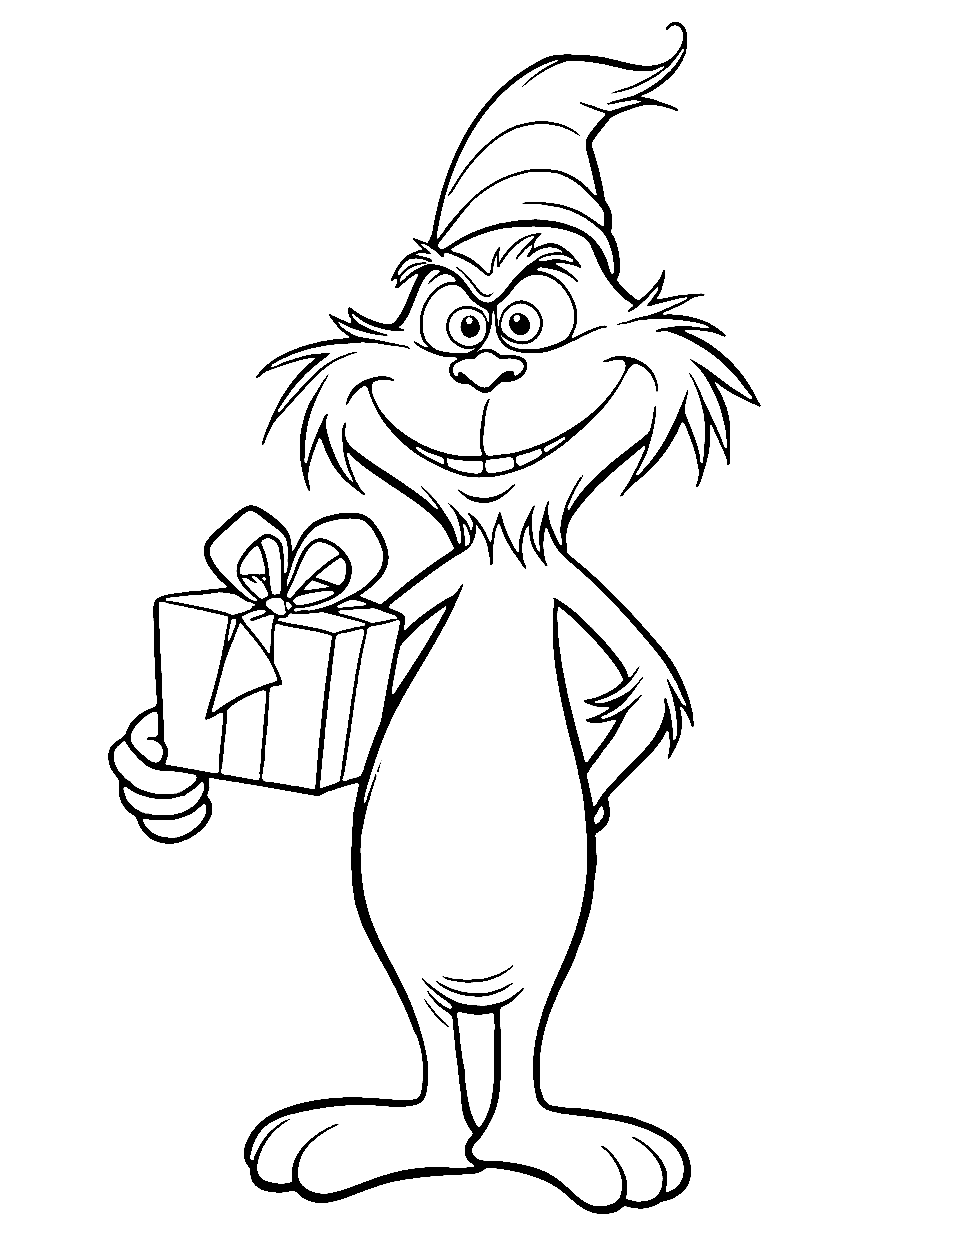 Happy Grinch Coloring Page - The Grinch, with a broad smile, holding a gift in his hand.